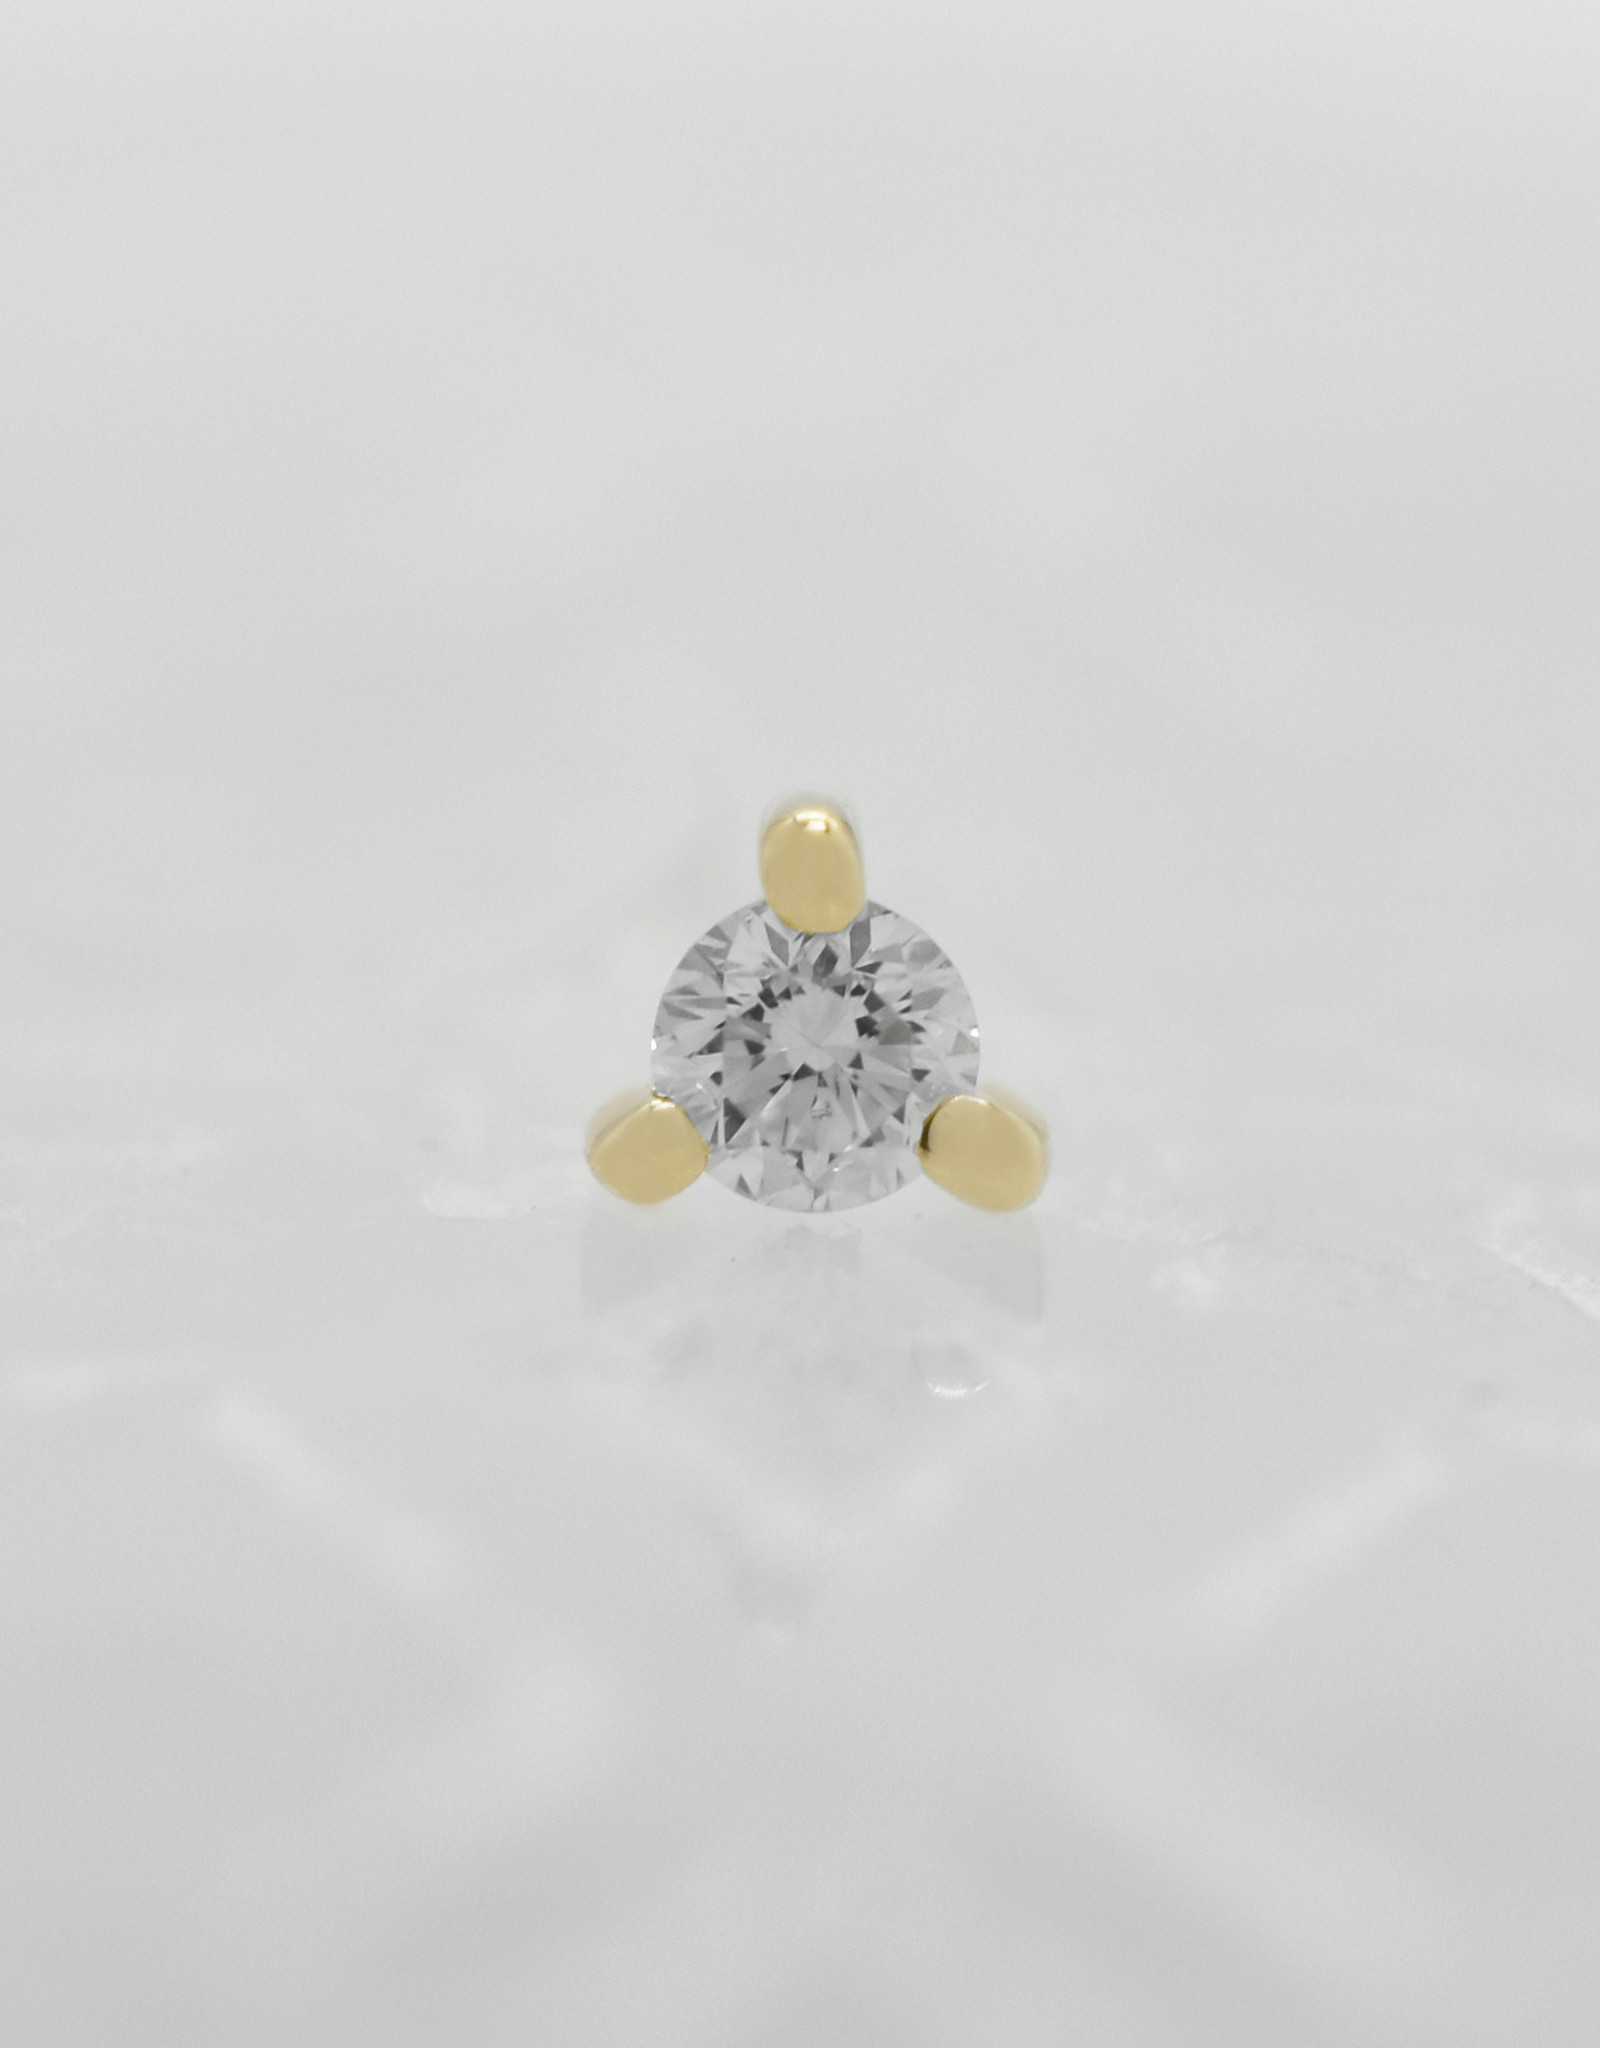 Modern Mood Modern Mood 2mm Solitaire Gia 3 Prong with White Diamond YG